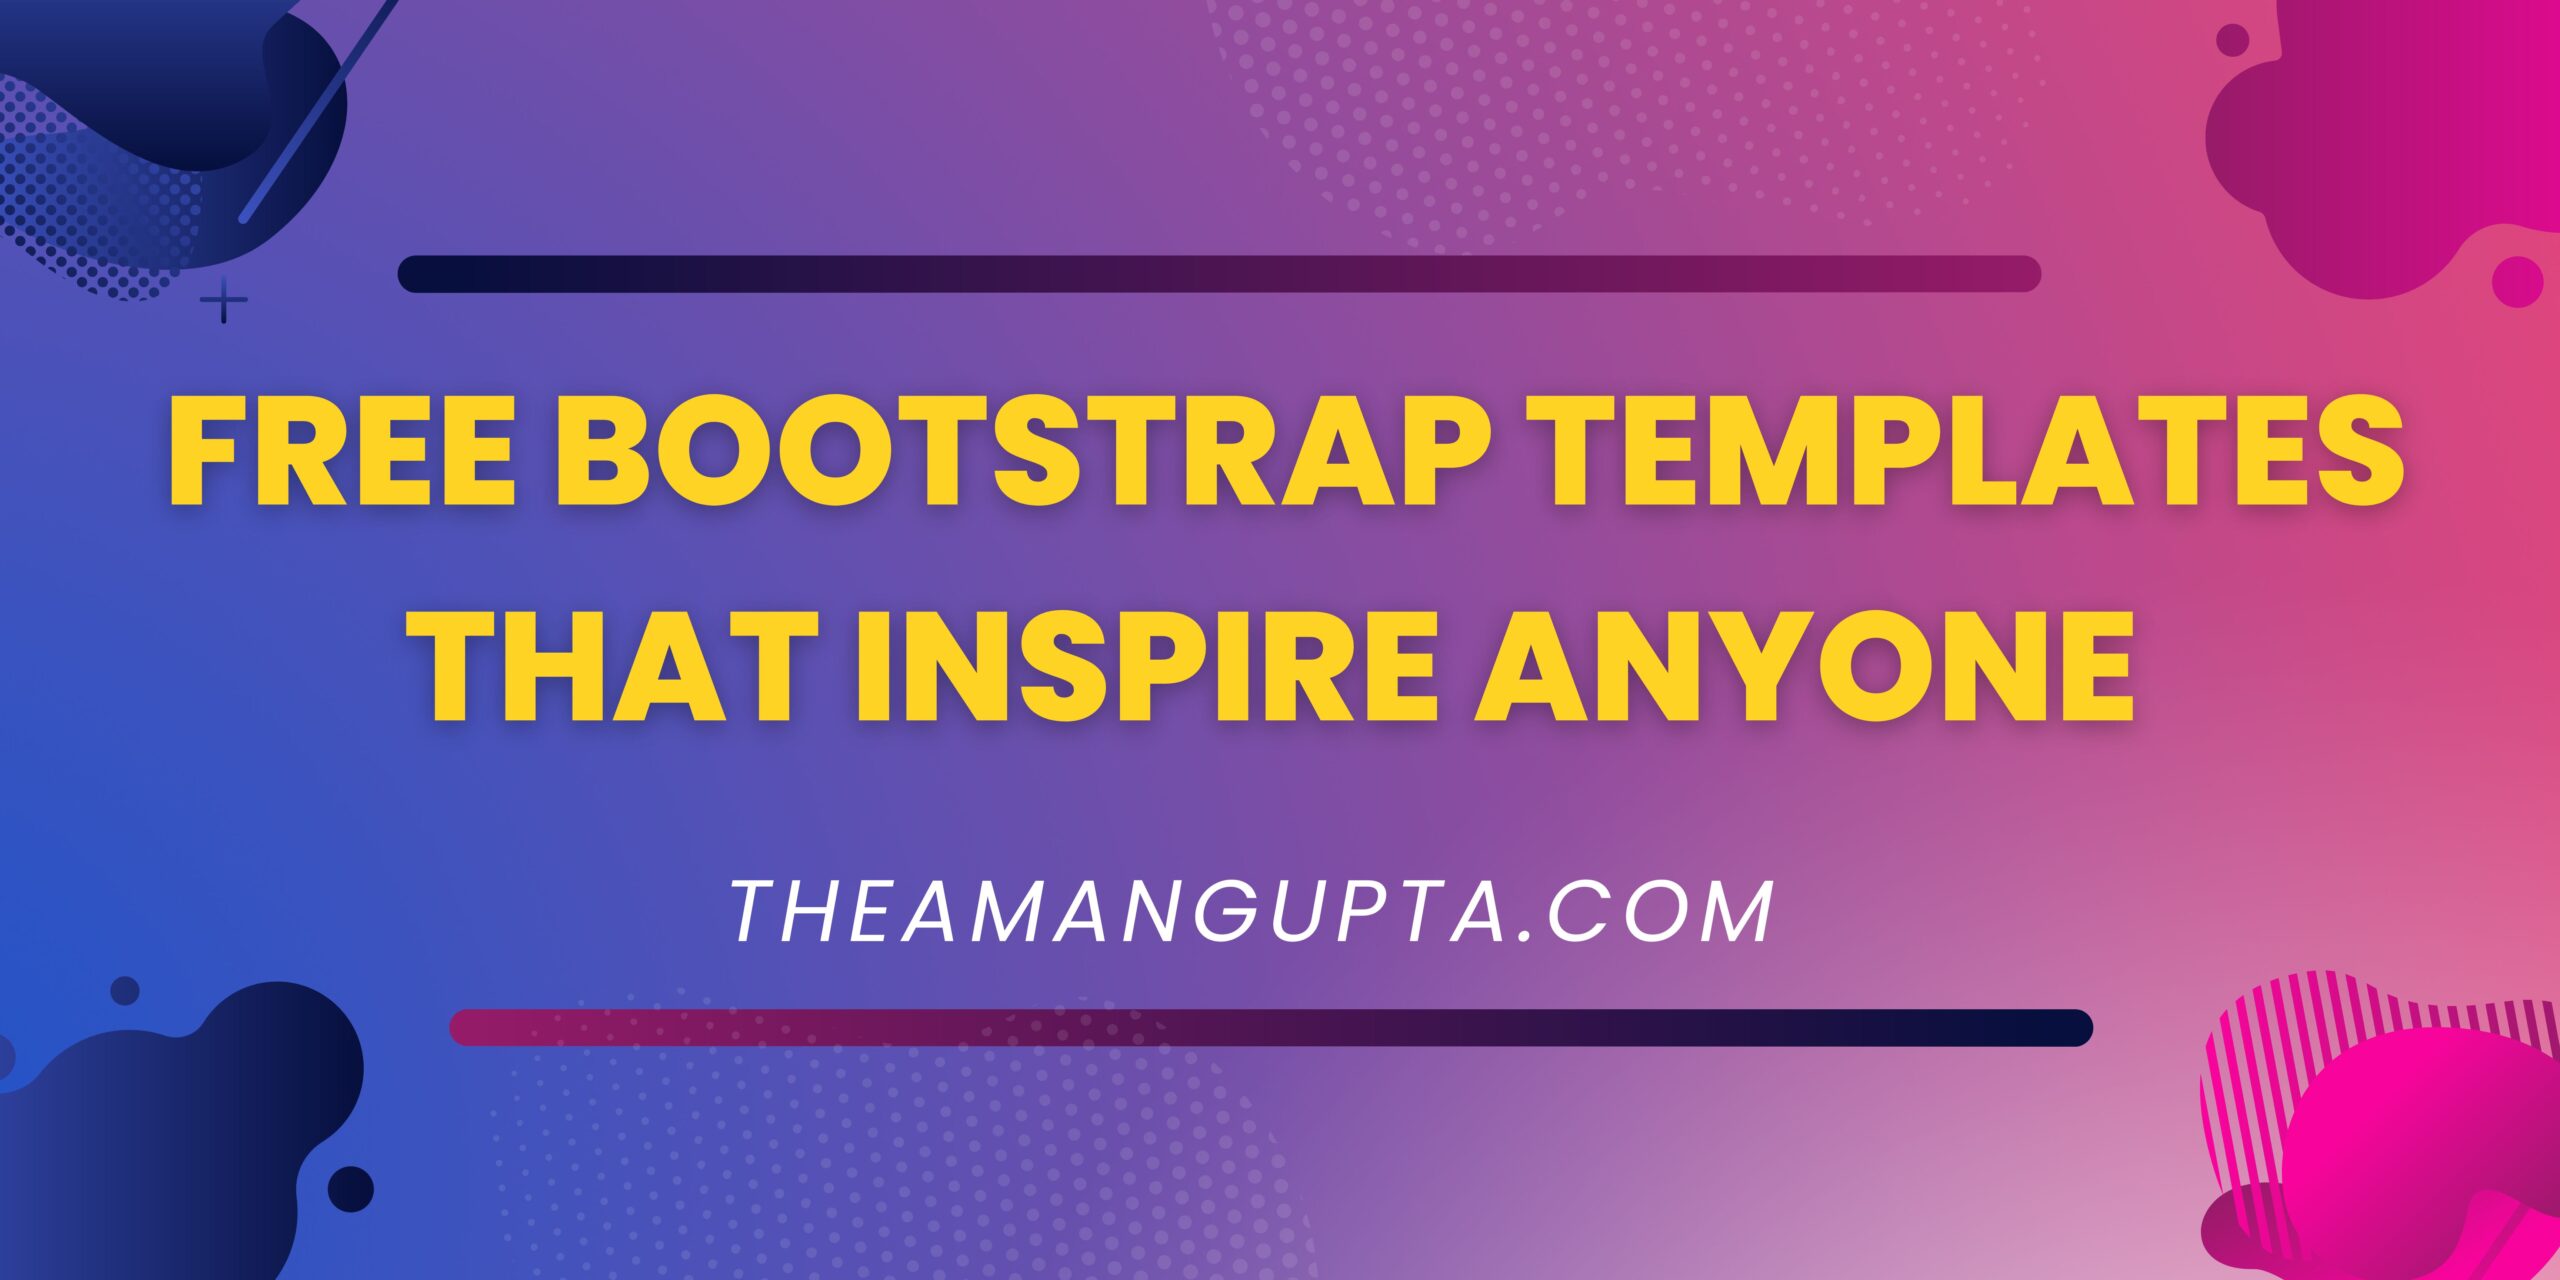 Free Bootstrap Templates That Inspire Anyone.|Templates|Theamangupta|Theamangupta